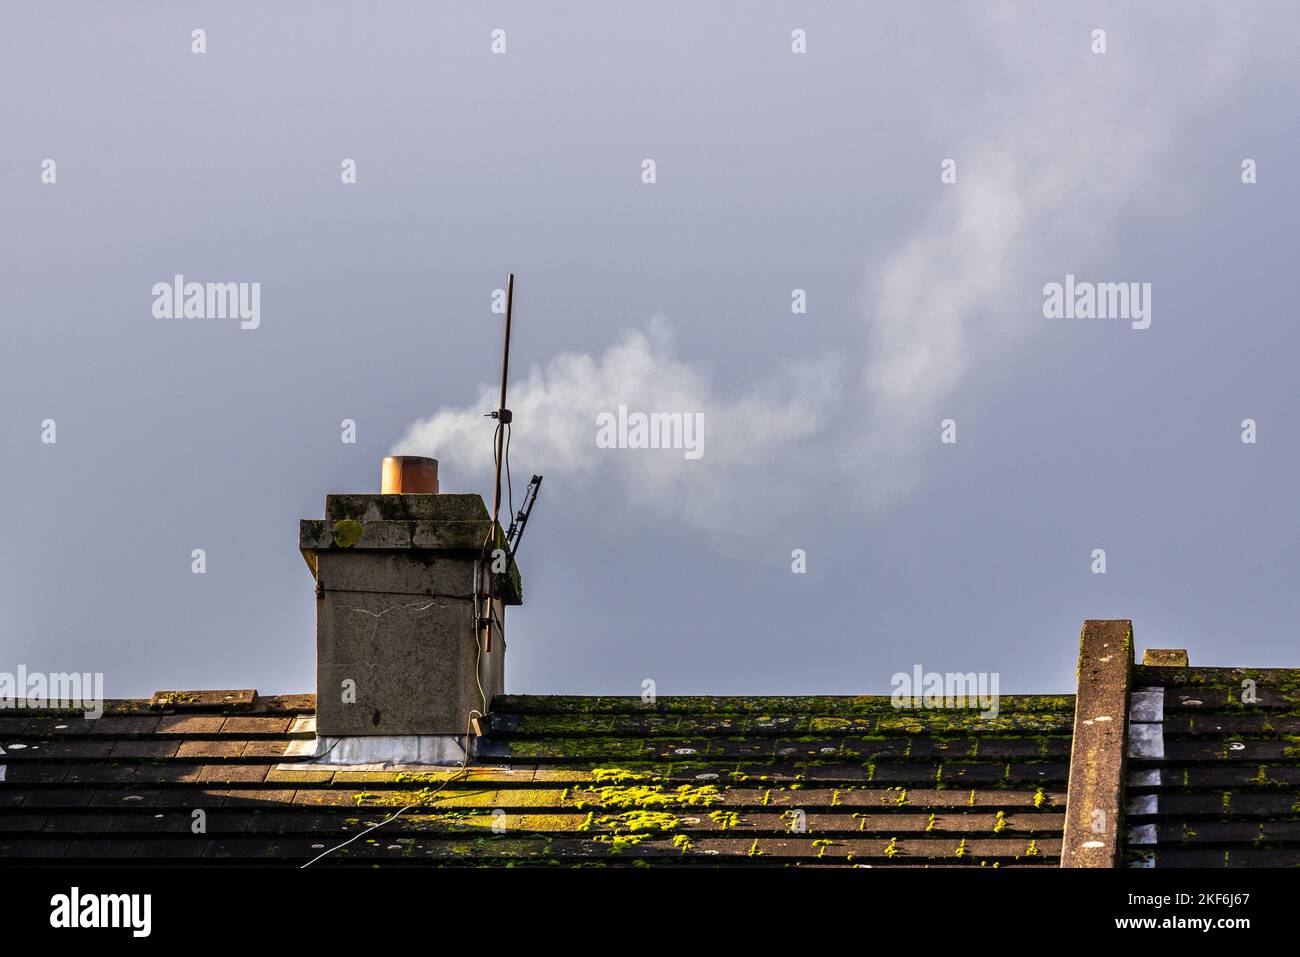 Smoke rising from a house chimney in Ireland. Stock Photo